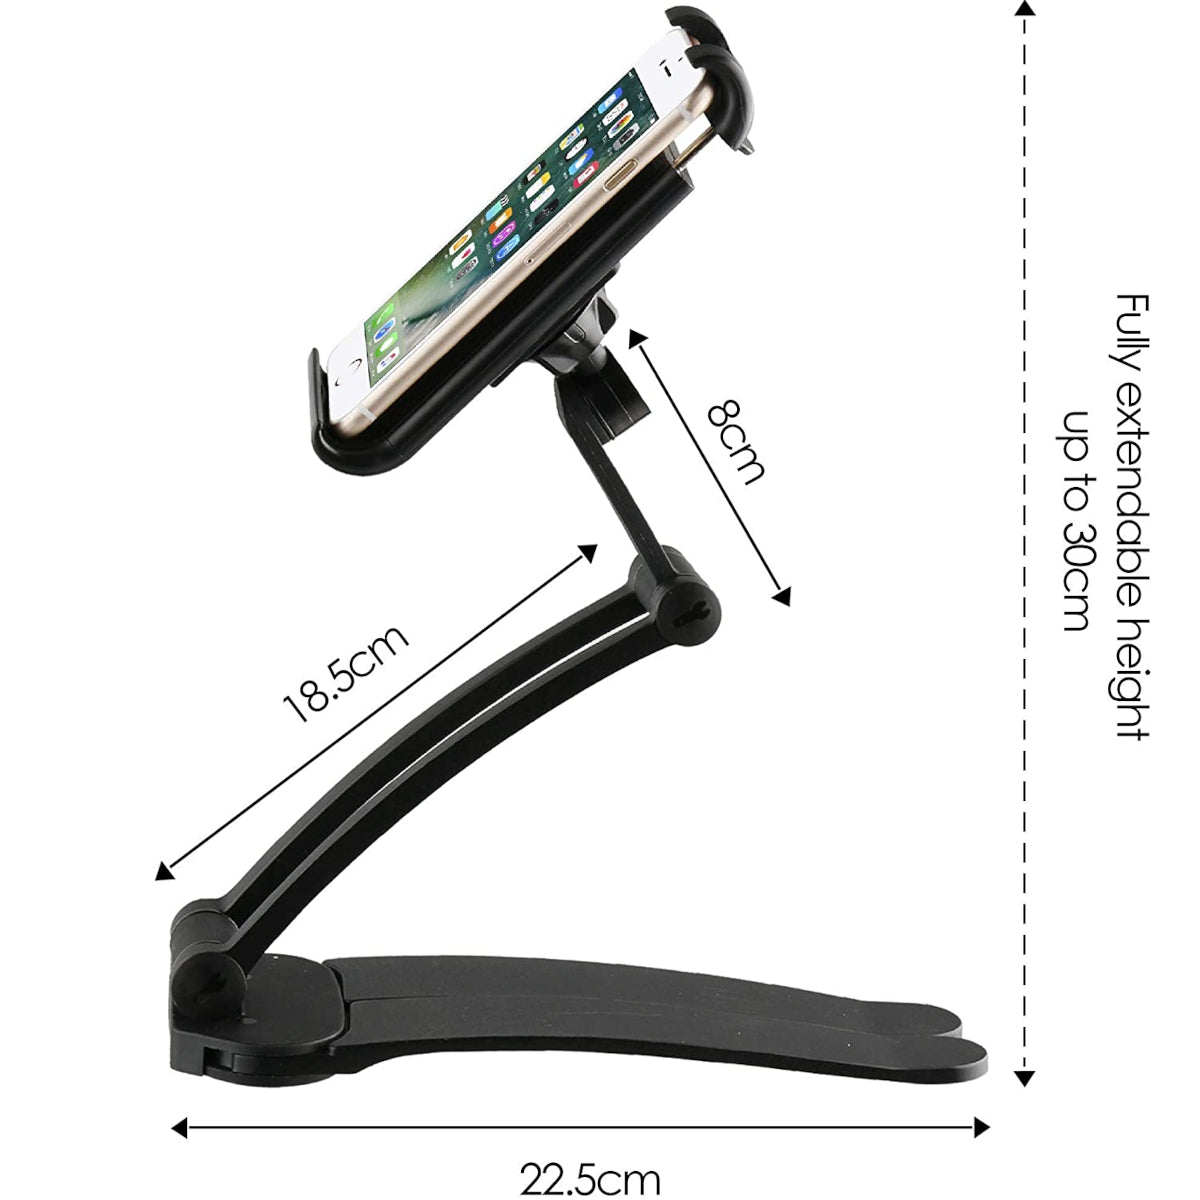 A Tablet or Smartphone holder shown from the side holding an iPhone. The dimensions of the stand are annotated on the image.  The top arm is 8cm long, the bottom arm is 18.5cm long. the foldable feet are 22.5cm long.  A two way arrow runs the height of the image with the words "Fully extendable height up to 30cm" next to it 